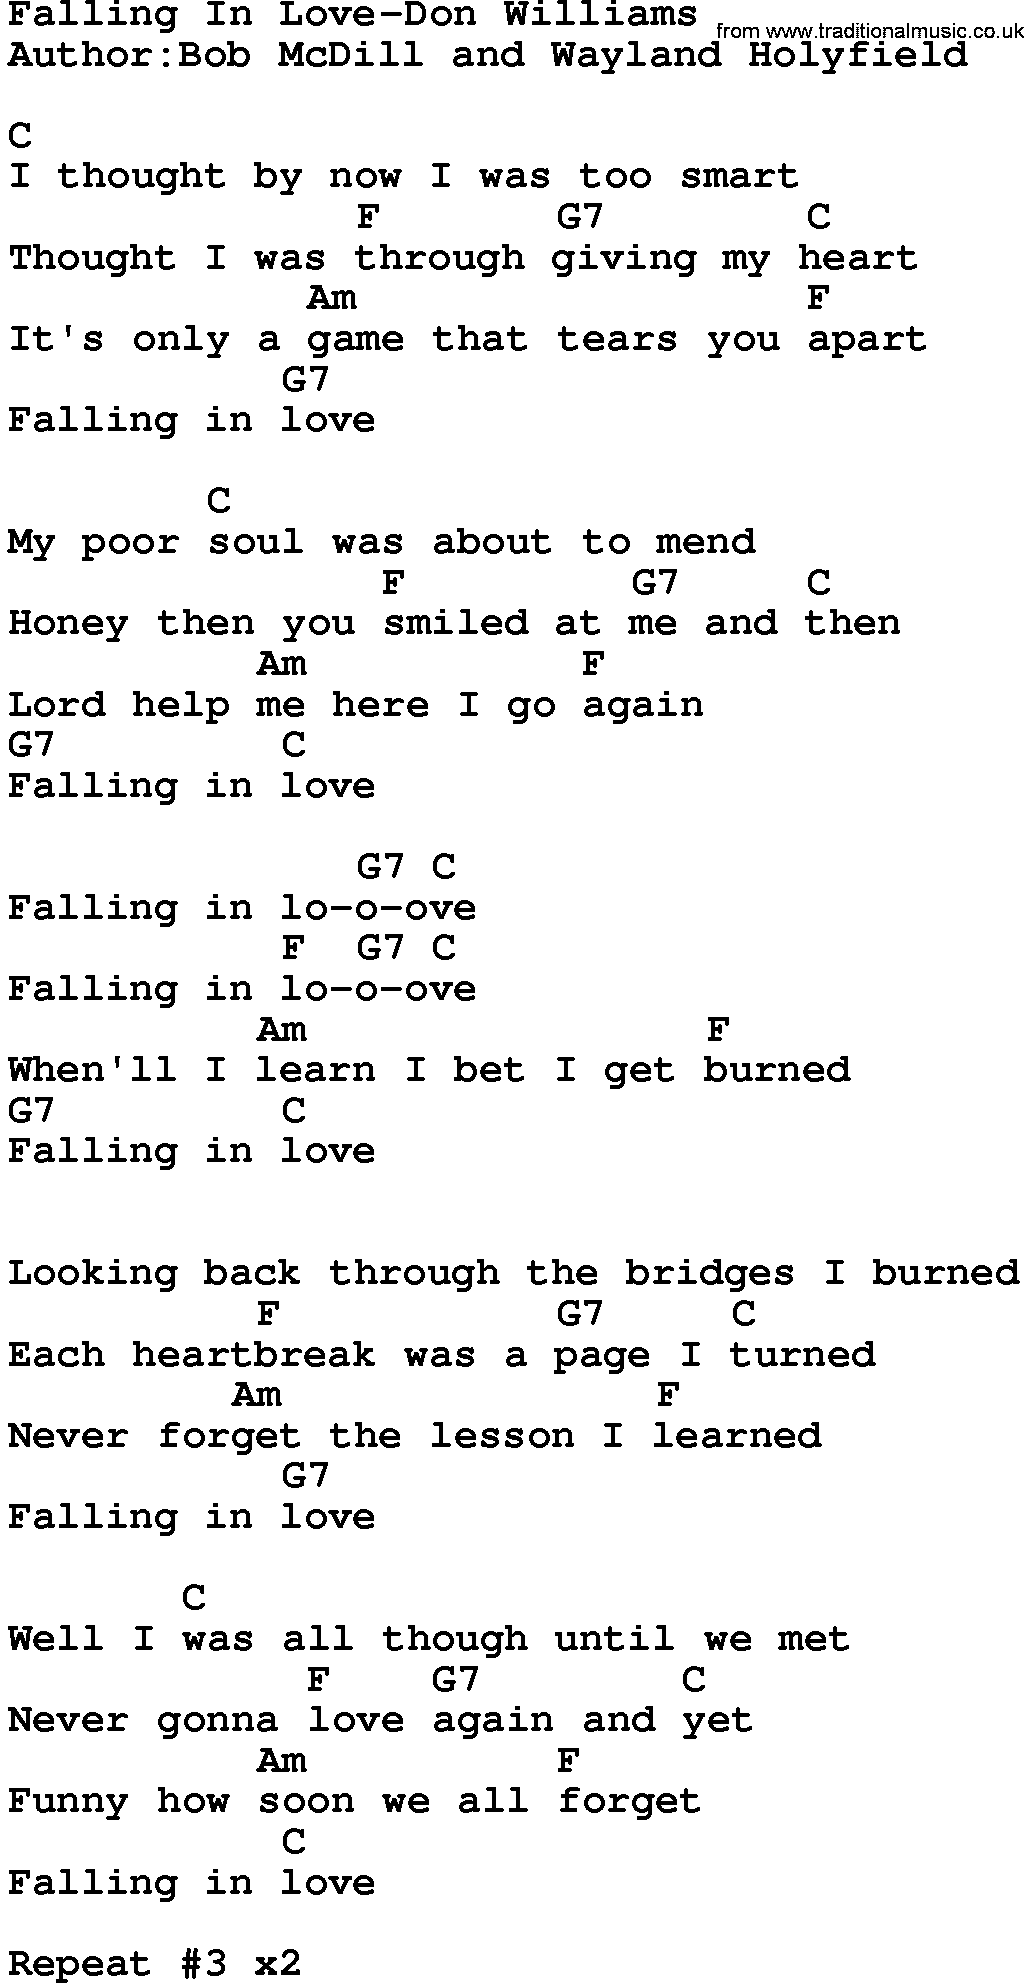 Country music song: Falling In Love-Don Williams lyrics and chords